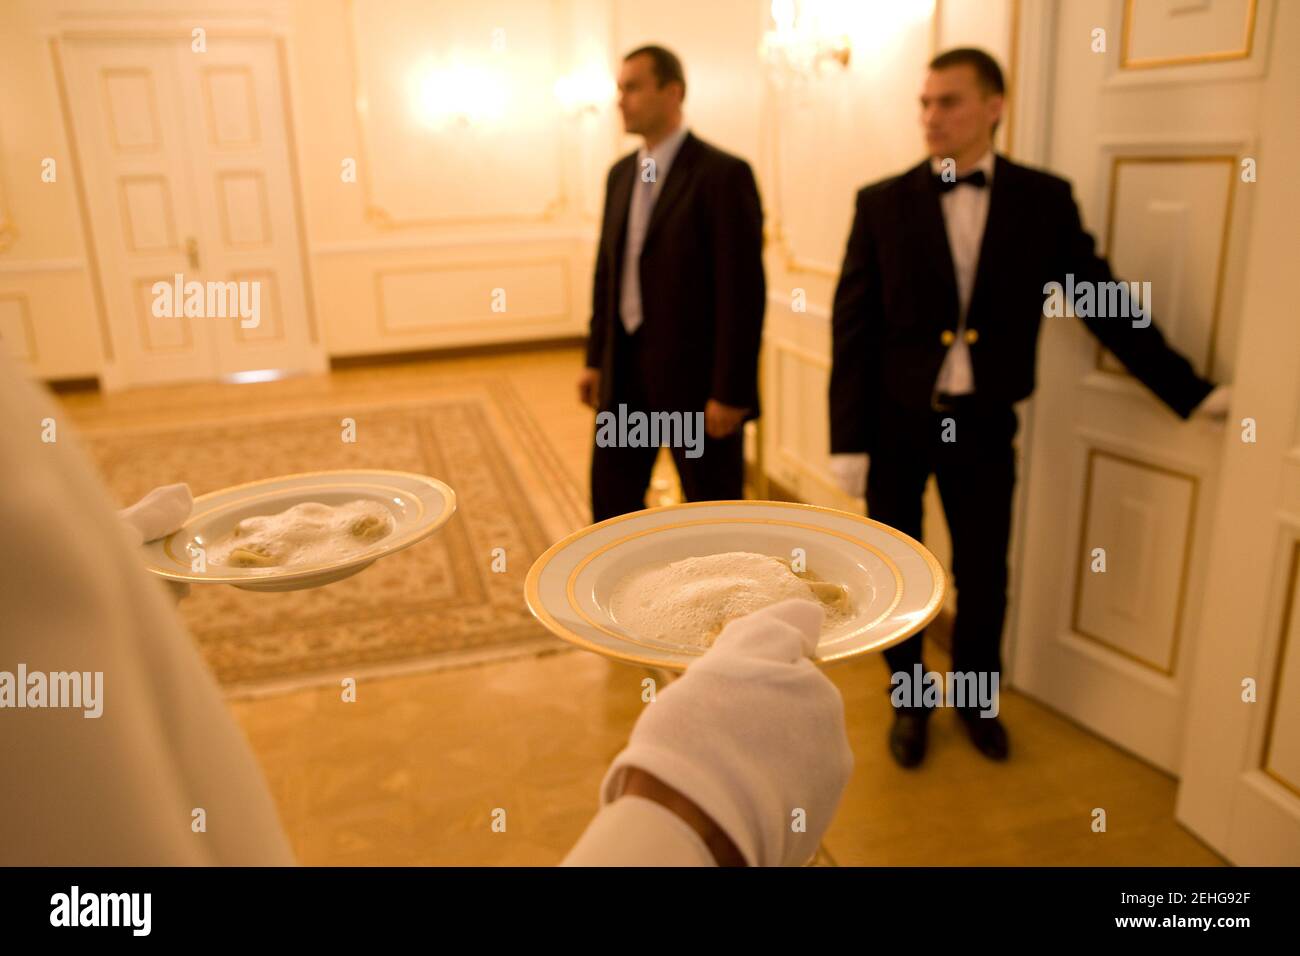 Waiters wait for their cue to serve breakfast for a meeting between President Barack Obama and Prime Minister Vladimir Putin at Putin's dacha outside Moscow, Russia, July 7, 2009. Stock Photo